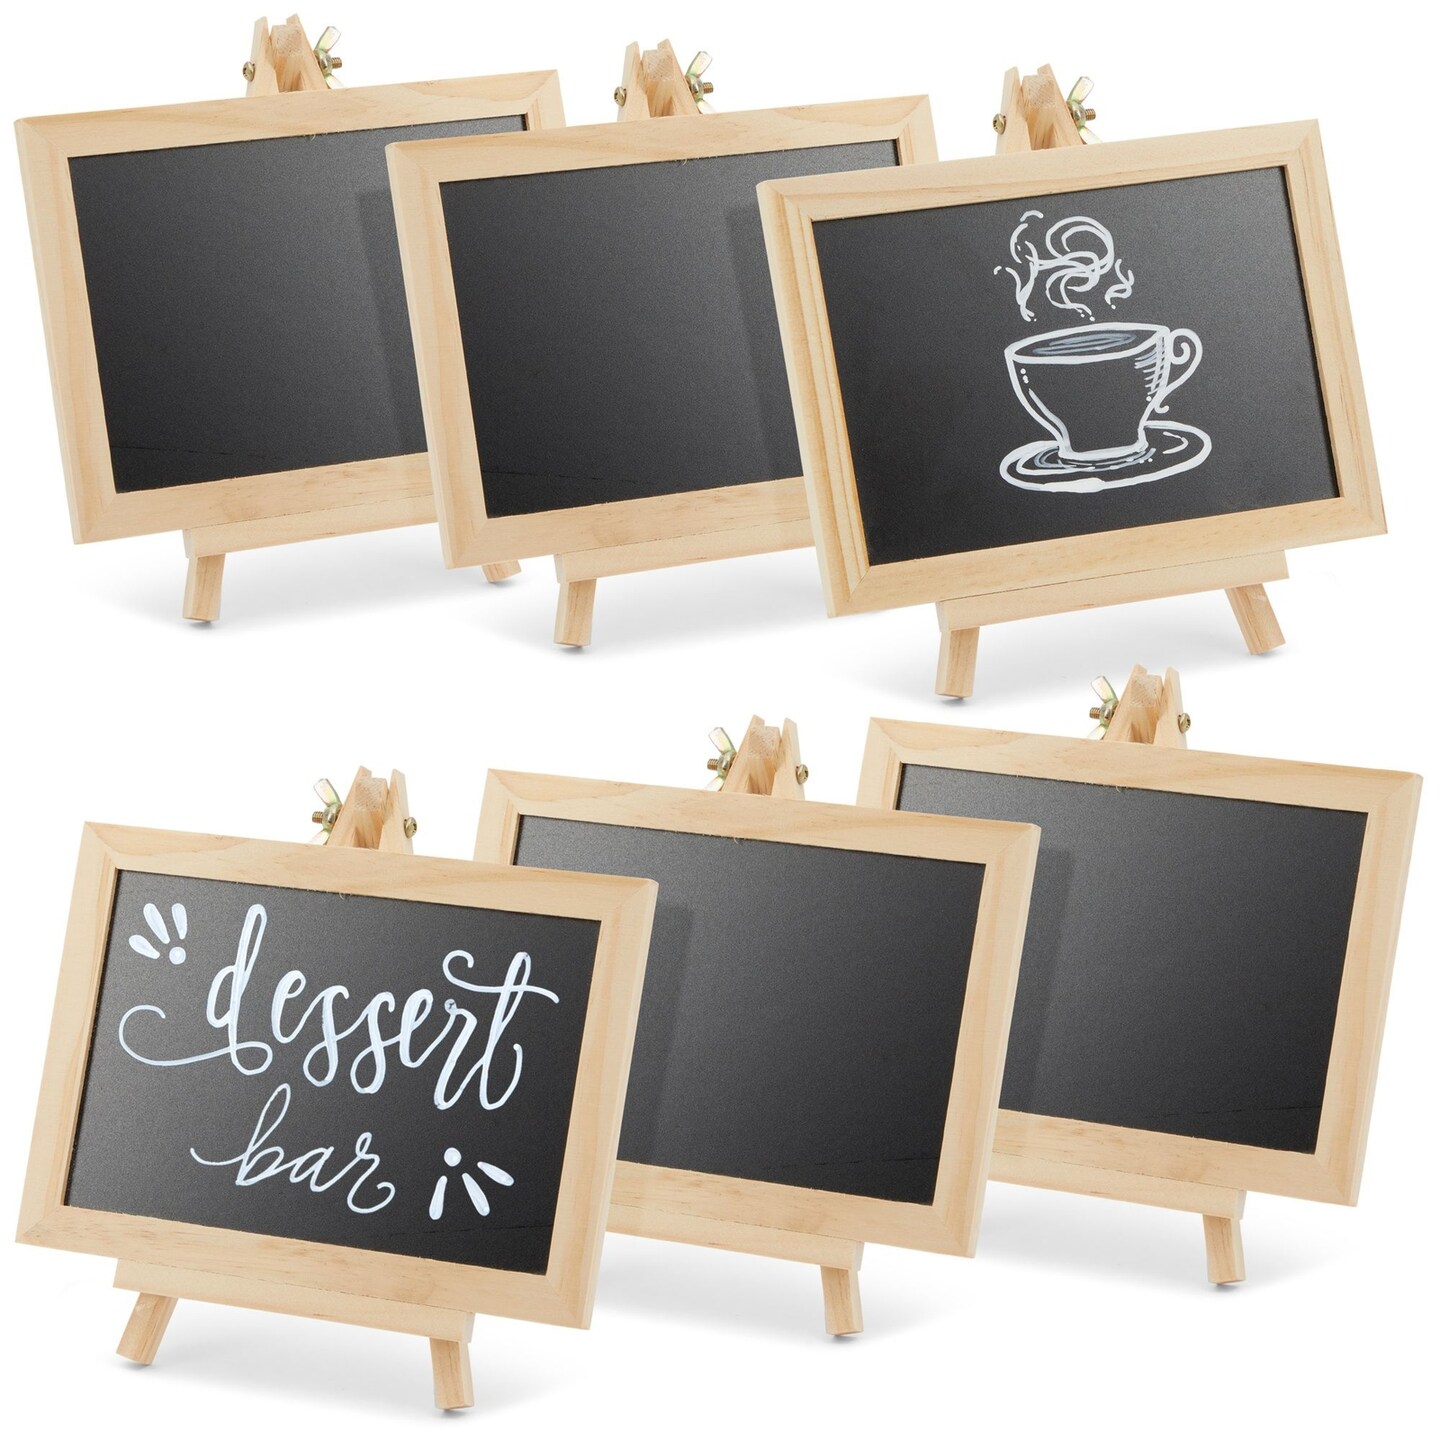 6-Pack Mini Chalkboard Signs with Easel Stand for Table Decorations,  Restaurant Food Display, Message Boards, Small Business, Wedding, Banquet,  Coffee